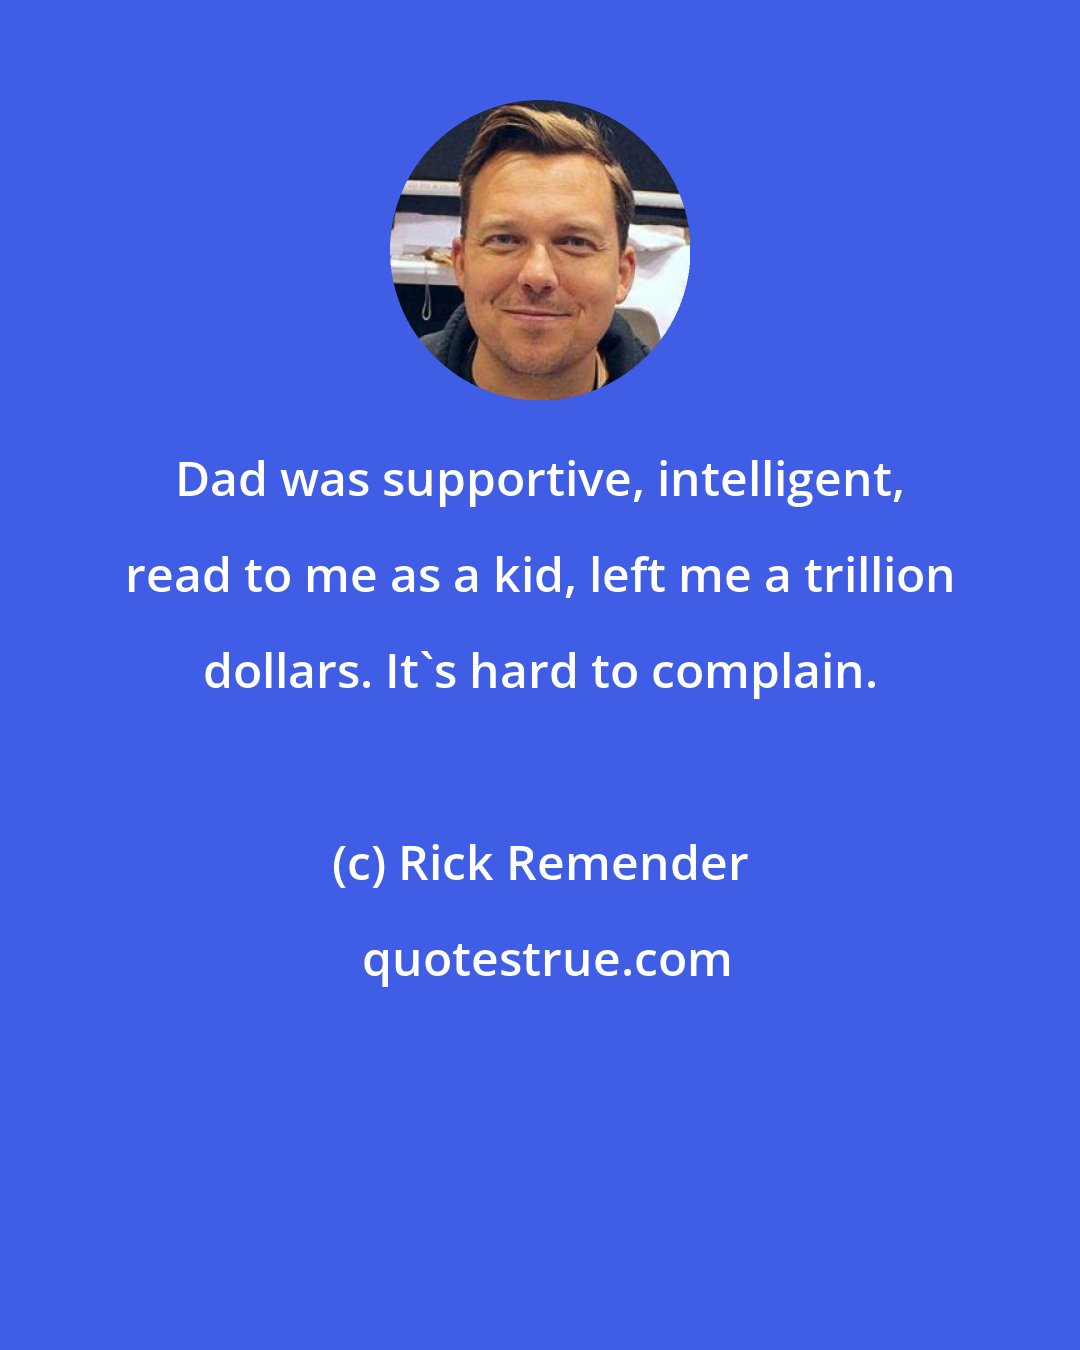 Rick Remender: Dad was supportive, intelligent, read to me as a kid, left me a trillion dollars. It's hard to complain.